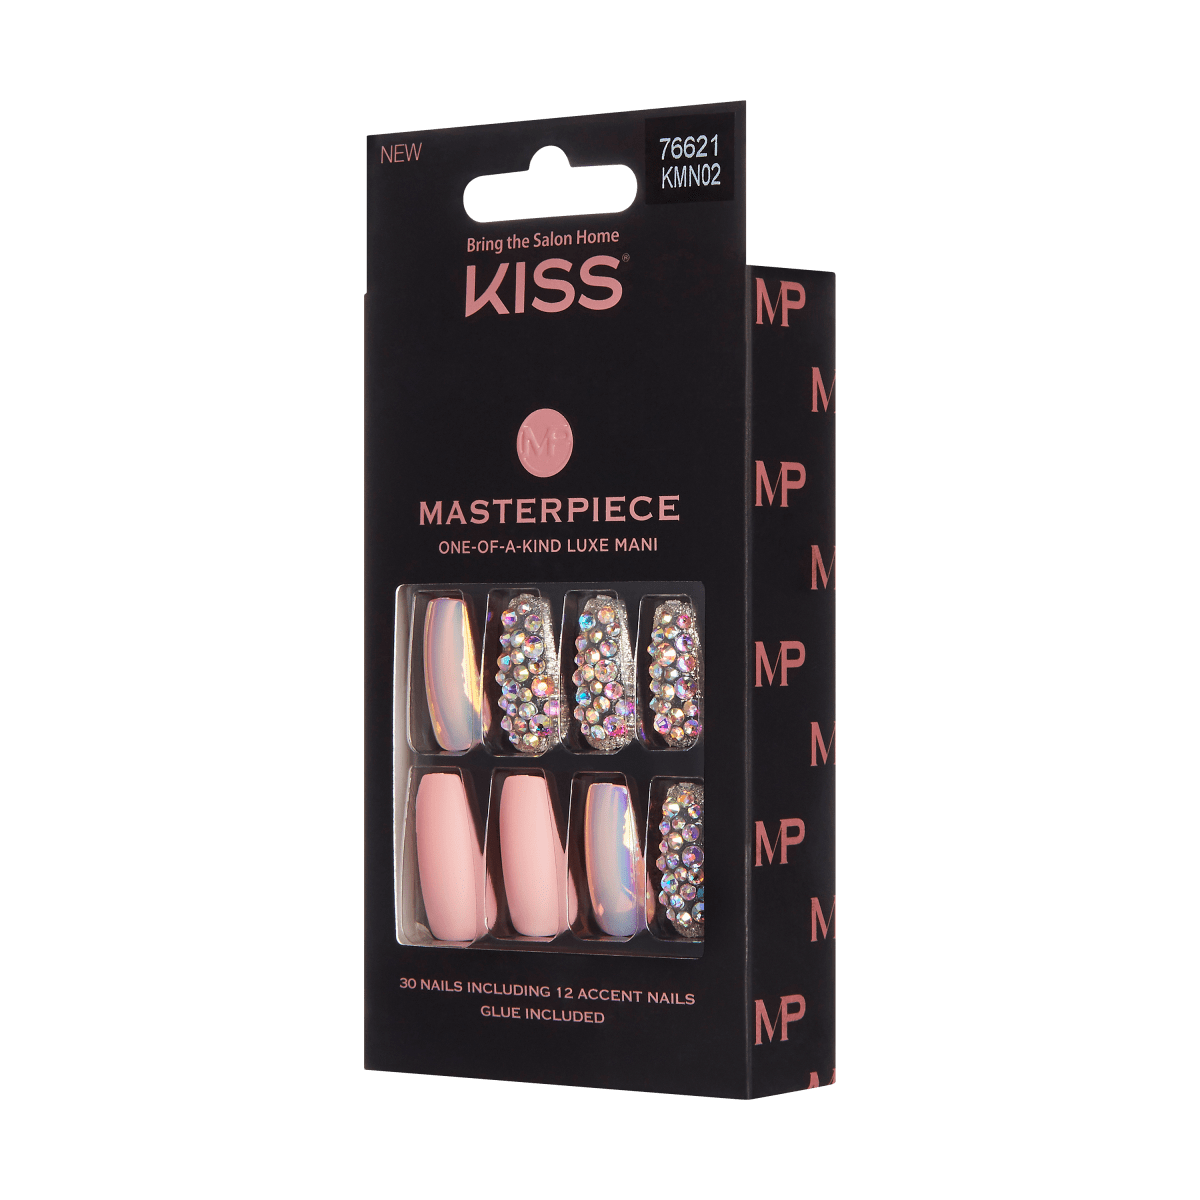 for liquidation only – KISS USA